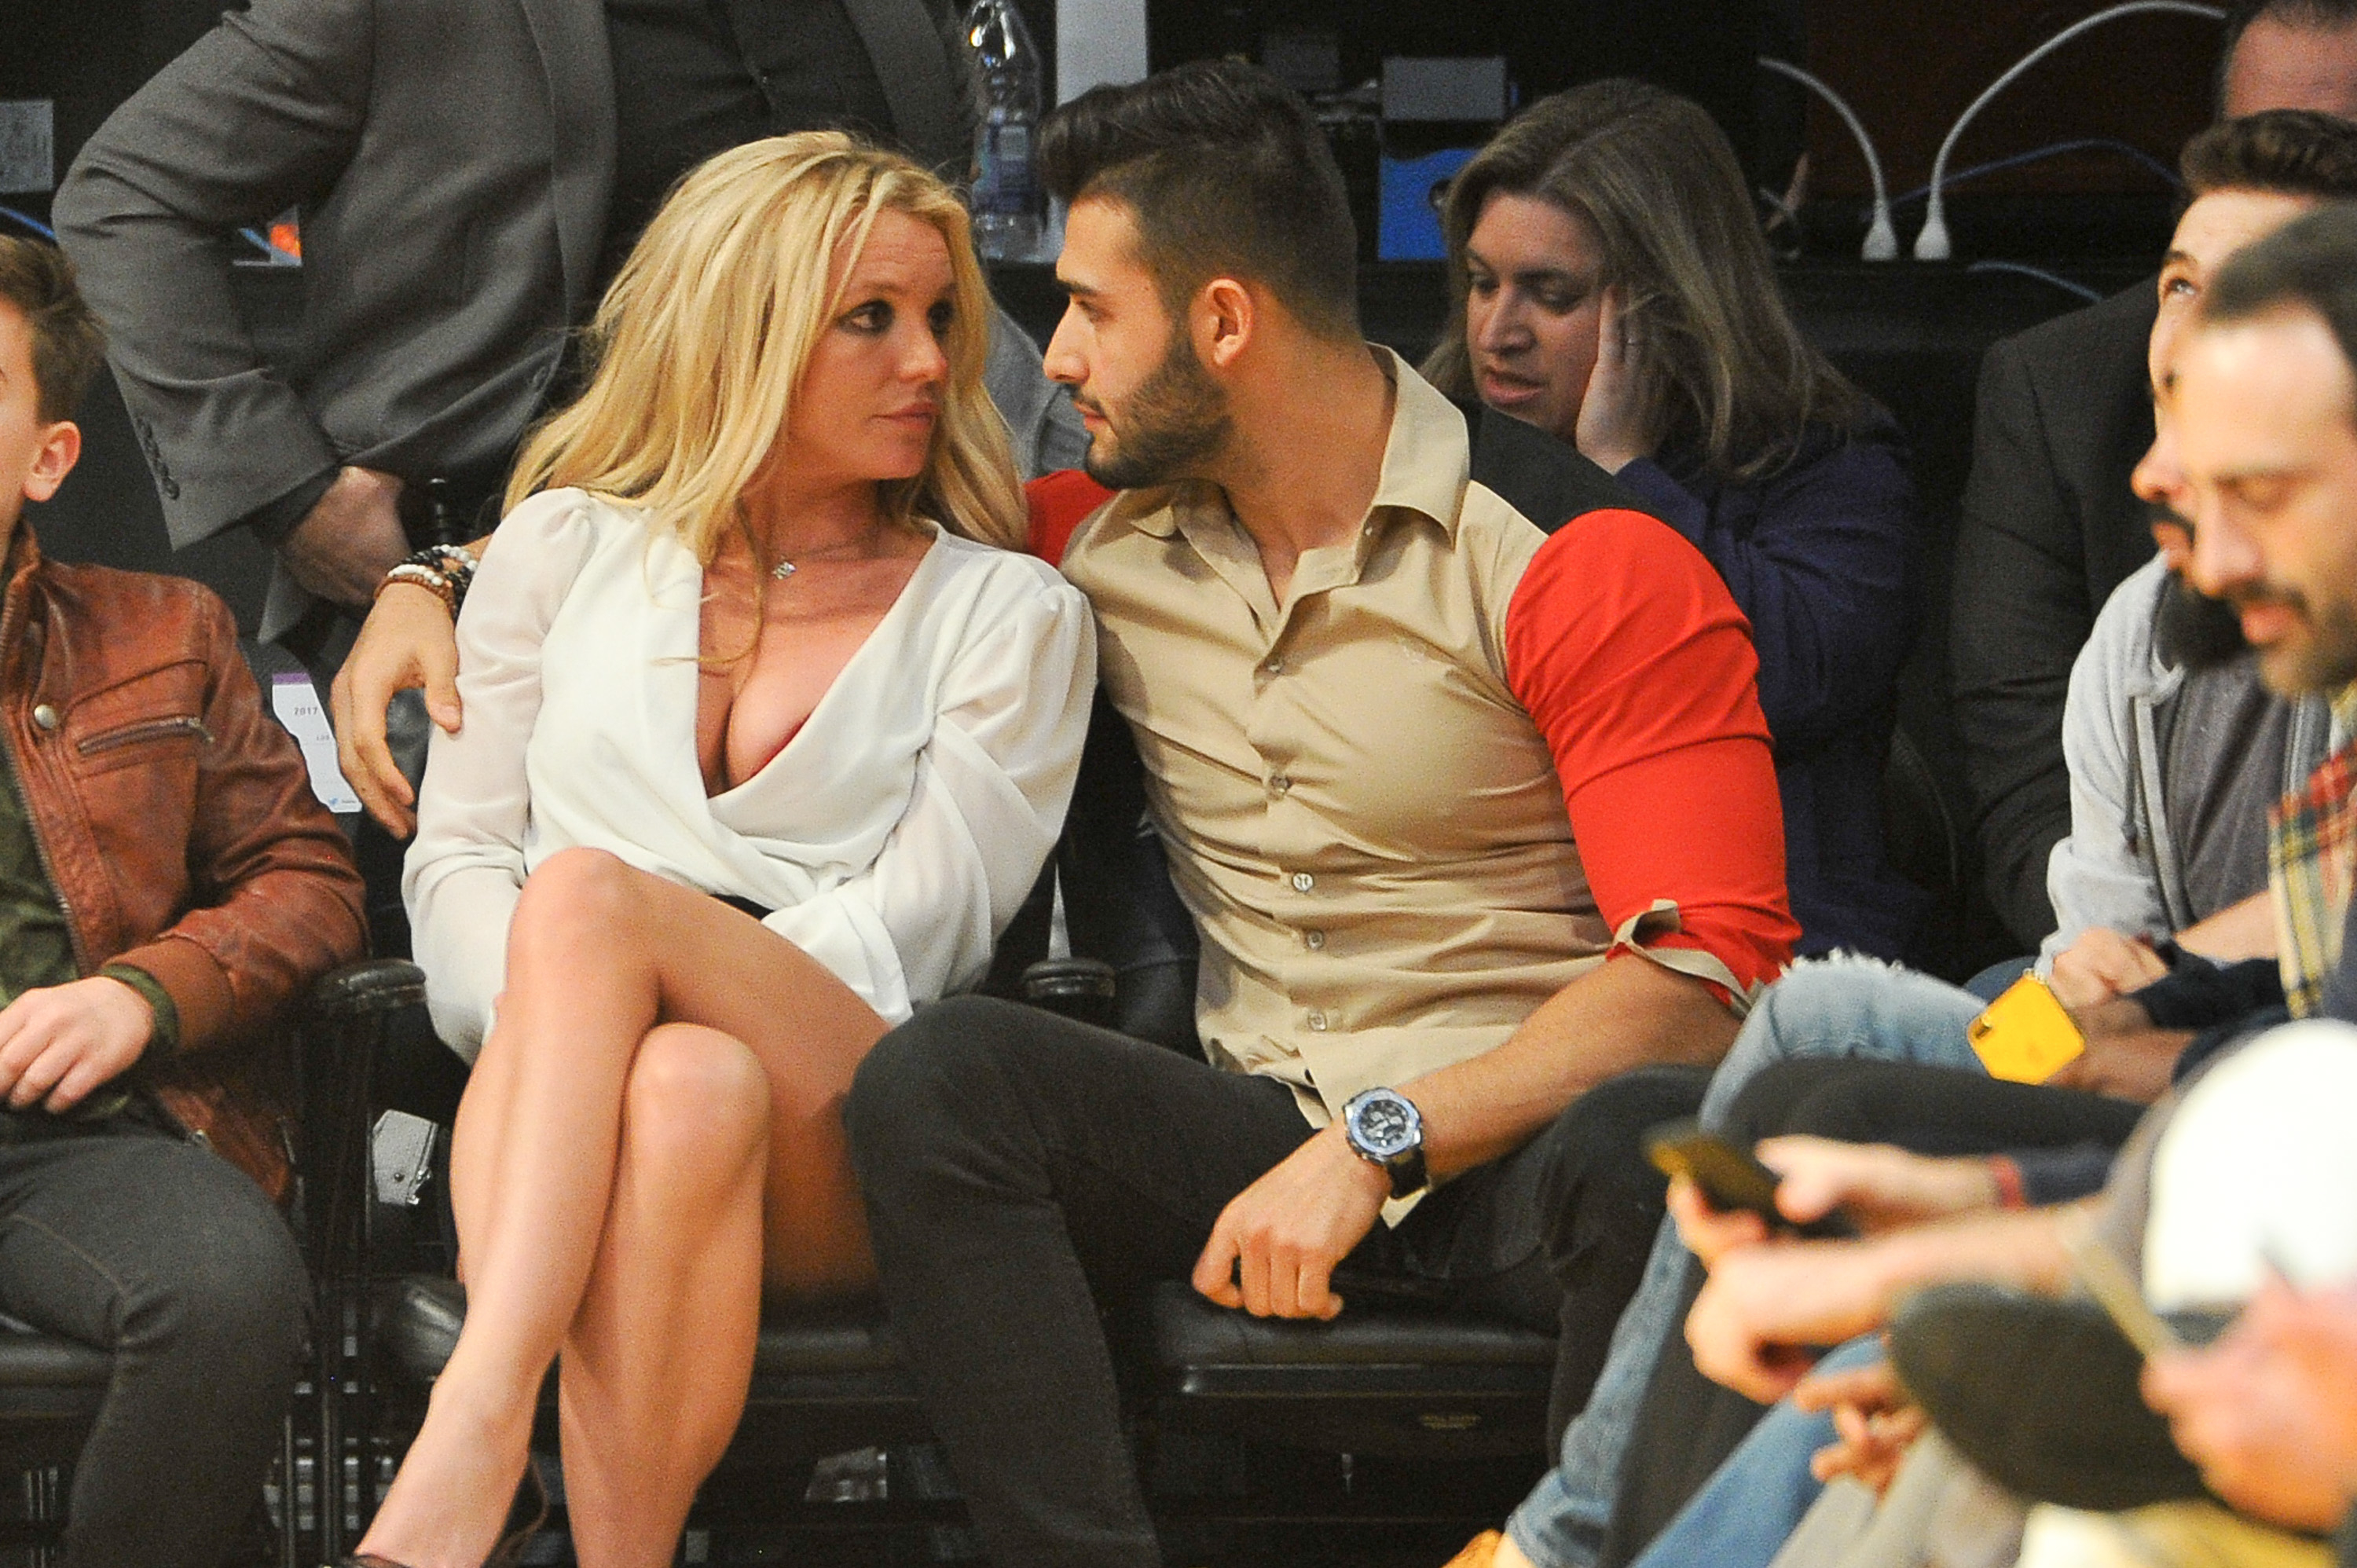 The former couple looking at each other as they sit courtside at a game